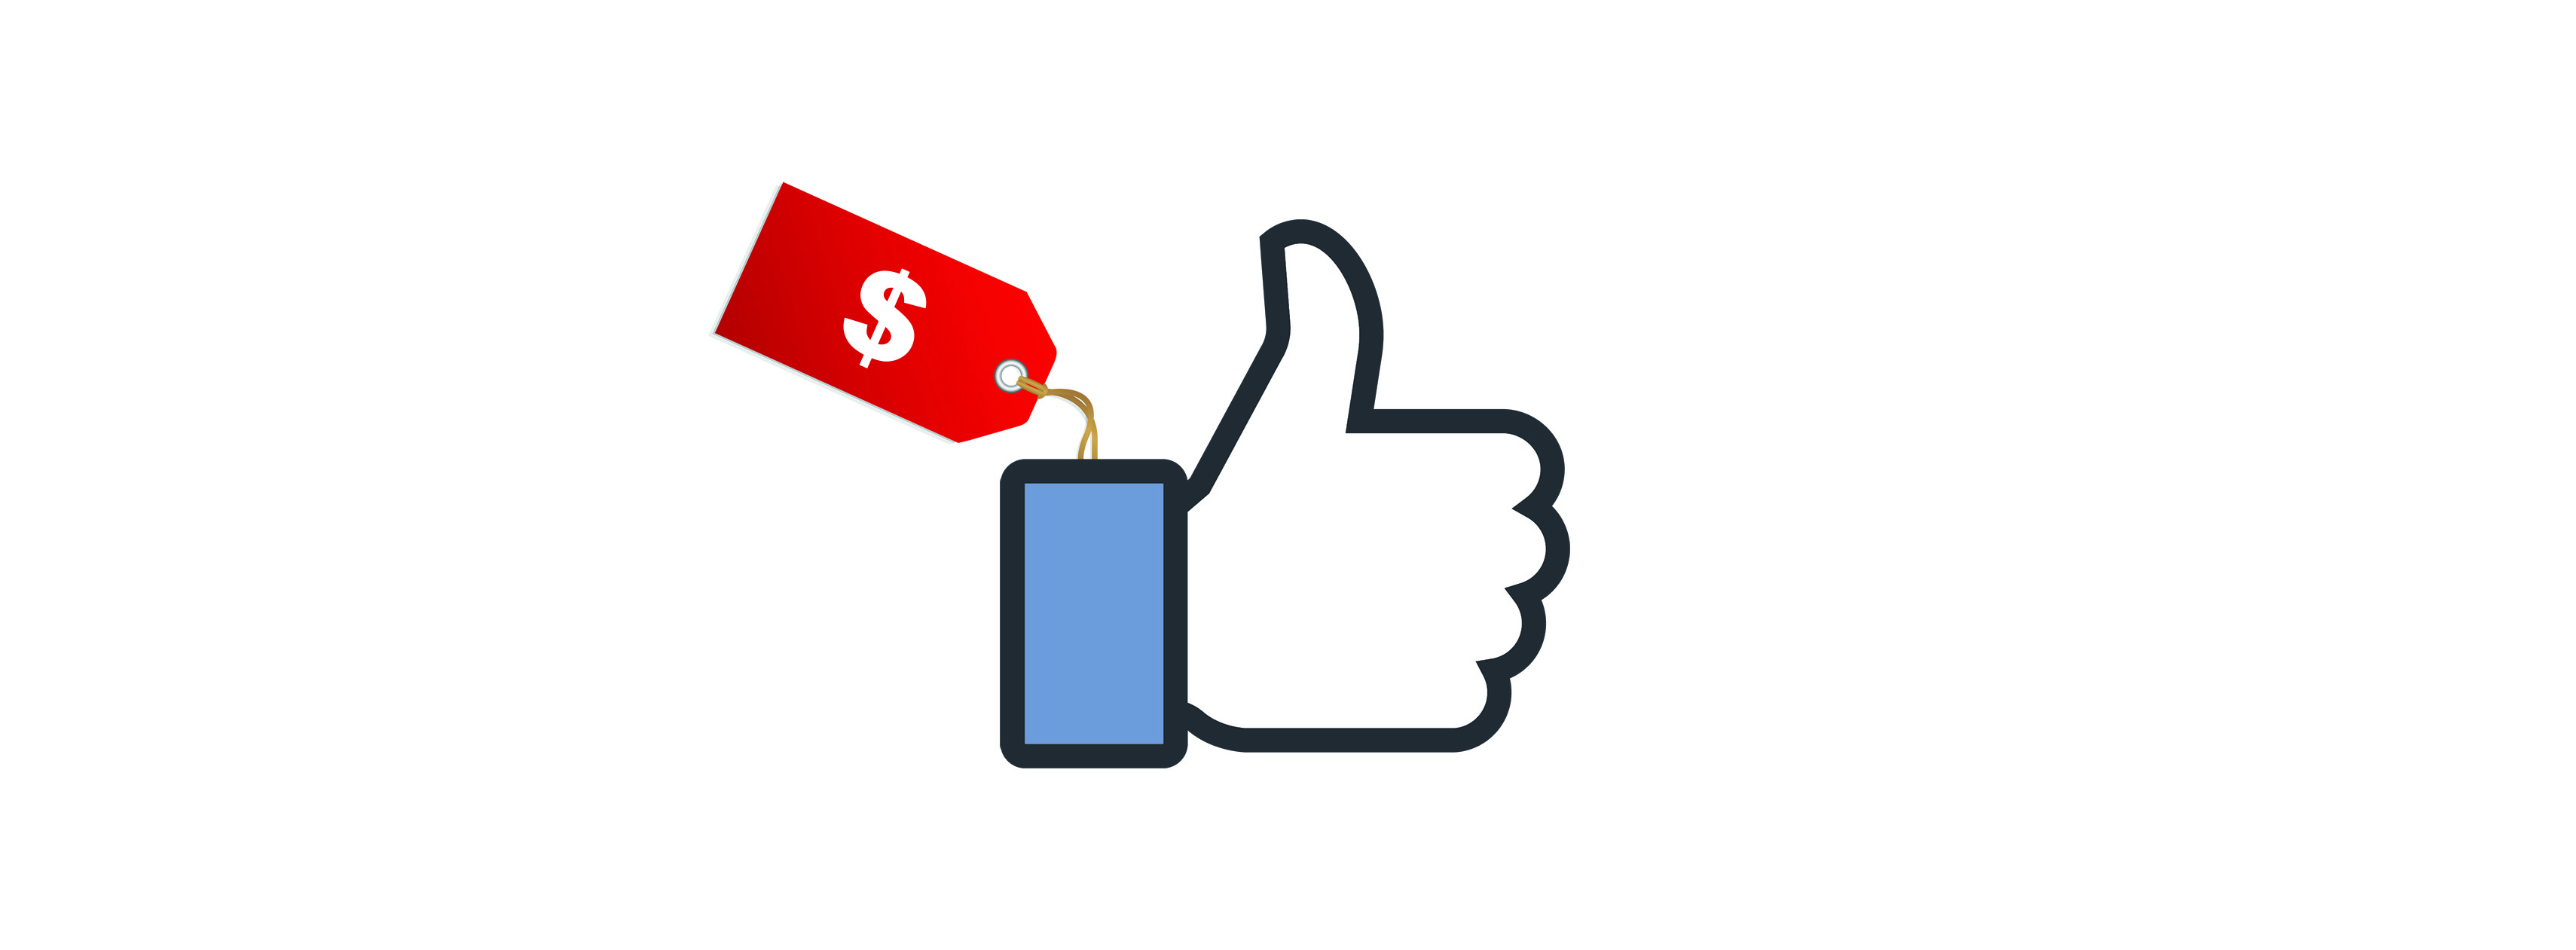 Paying for Facebook. 